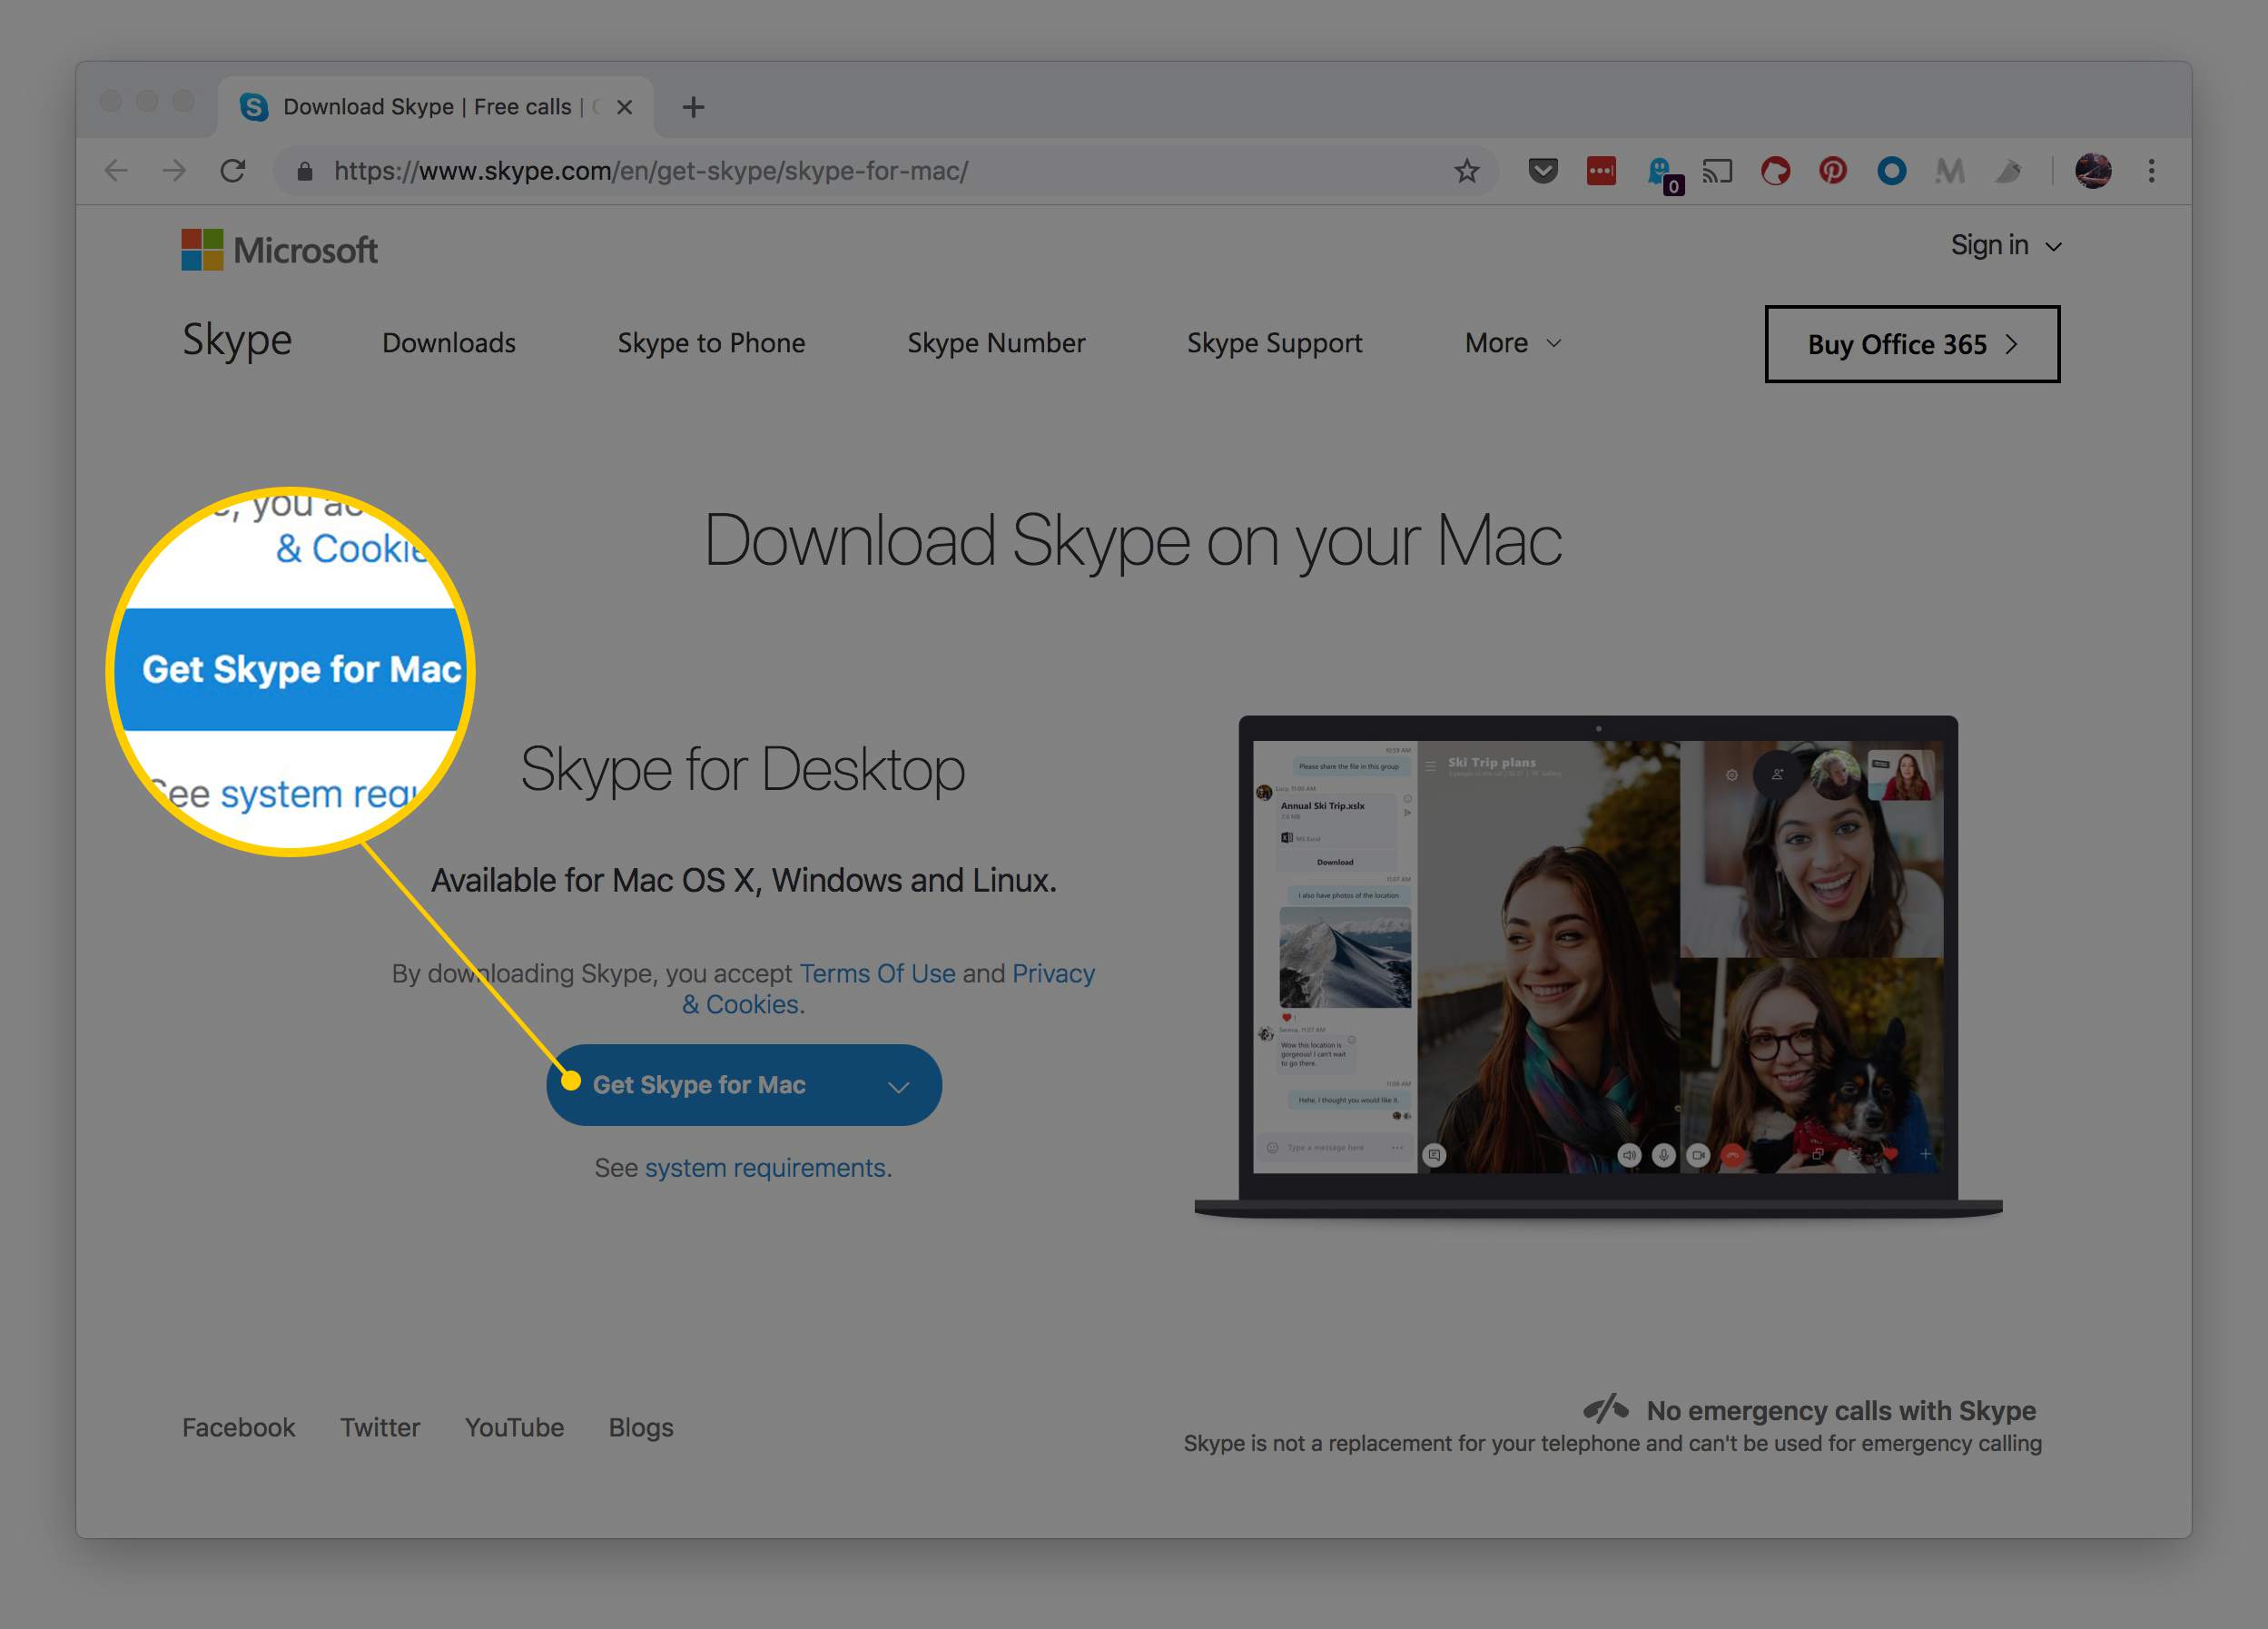 Anyone else had problems downloading skype for mac